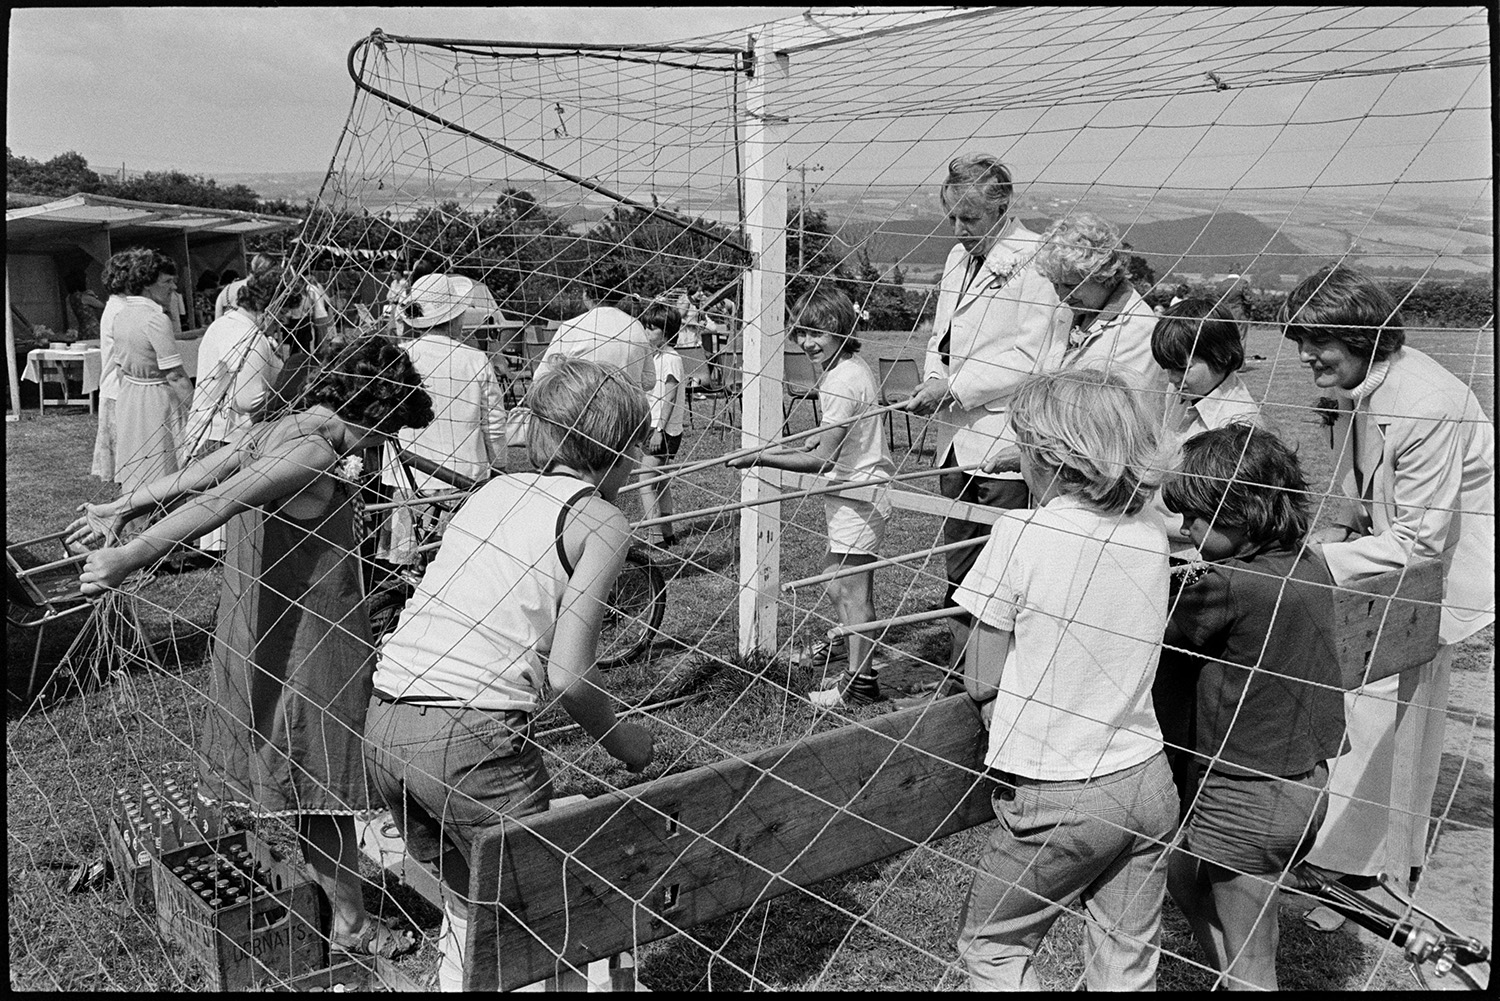 Amusements at village fete flowers, pony rides, skittles etc. 
[Men, women and children playing a fishing game in a goal net at Atherington Village fete. Boxes of drinks bottles can be seen on the ground by the game. Other people are looking at stalls in the background.]